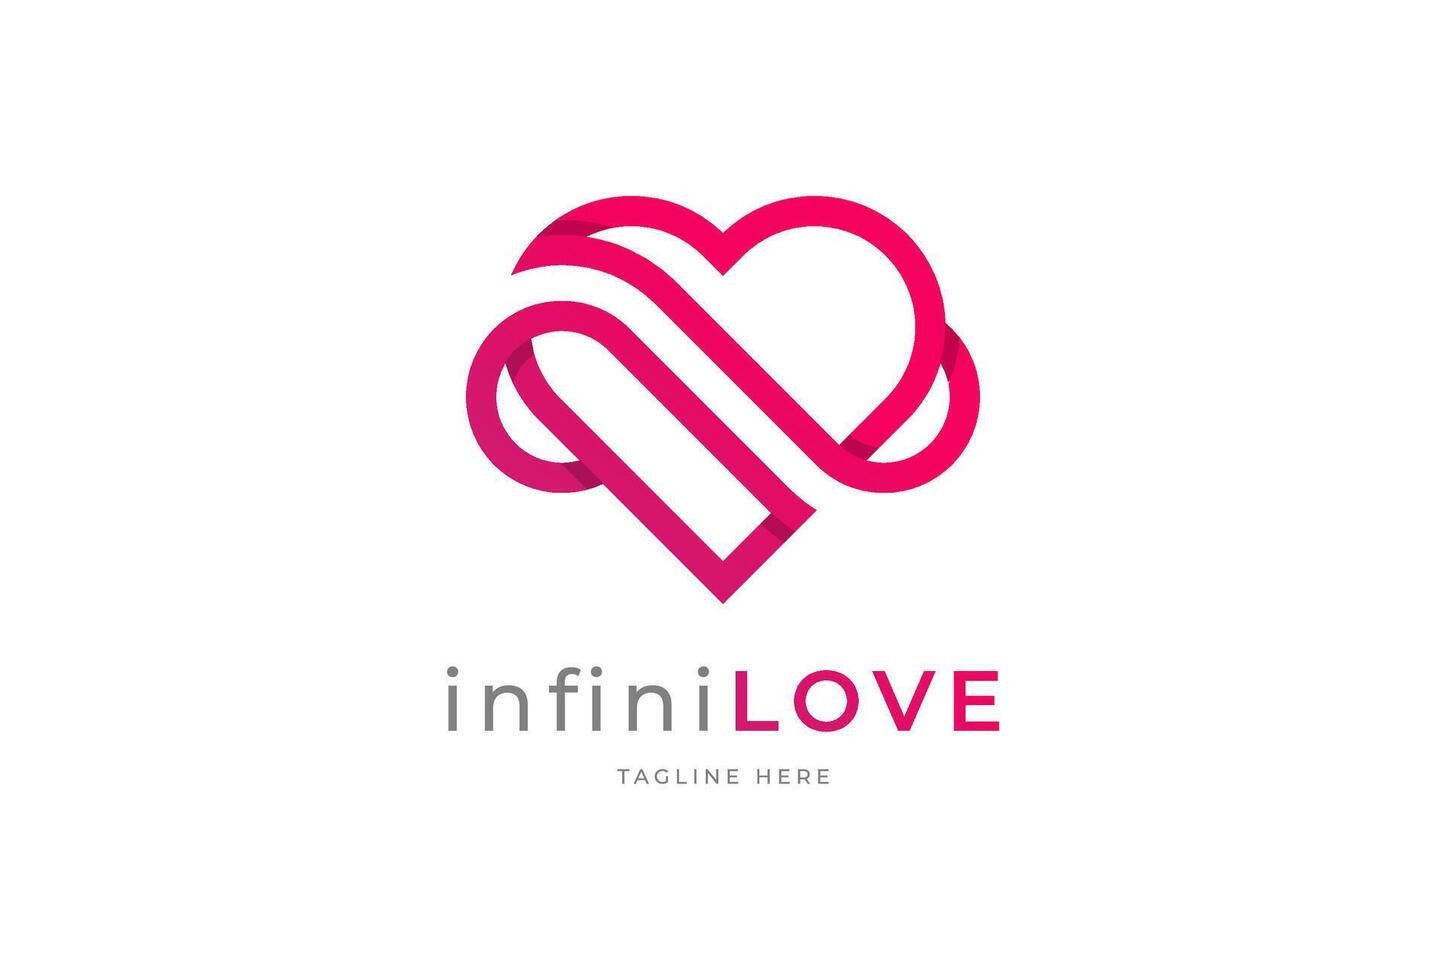 Love Logo, heart with infinity icon combination, usable for brand and company logos, flat design logo template, illustration vector